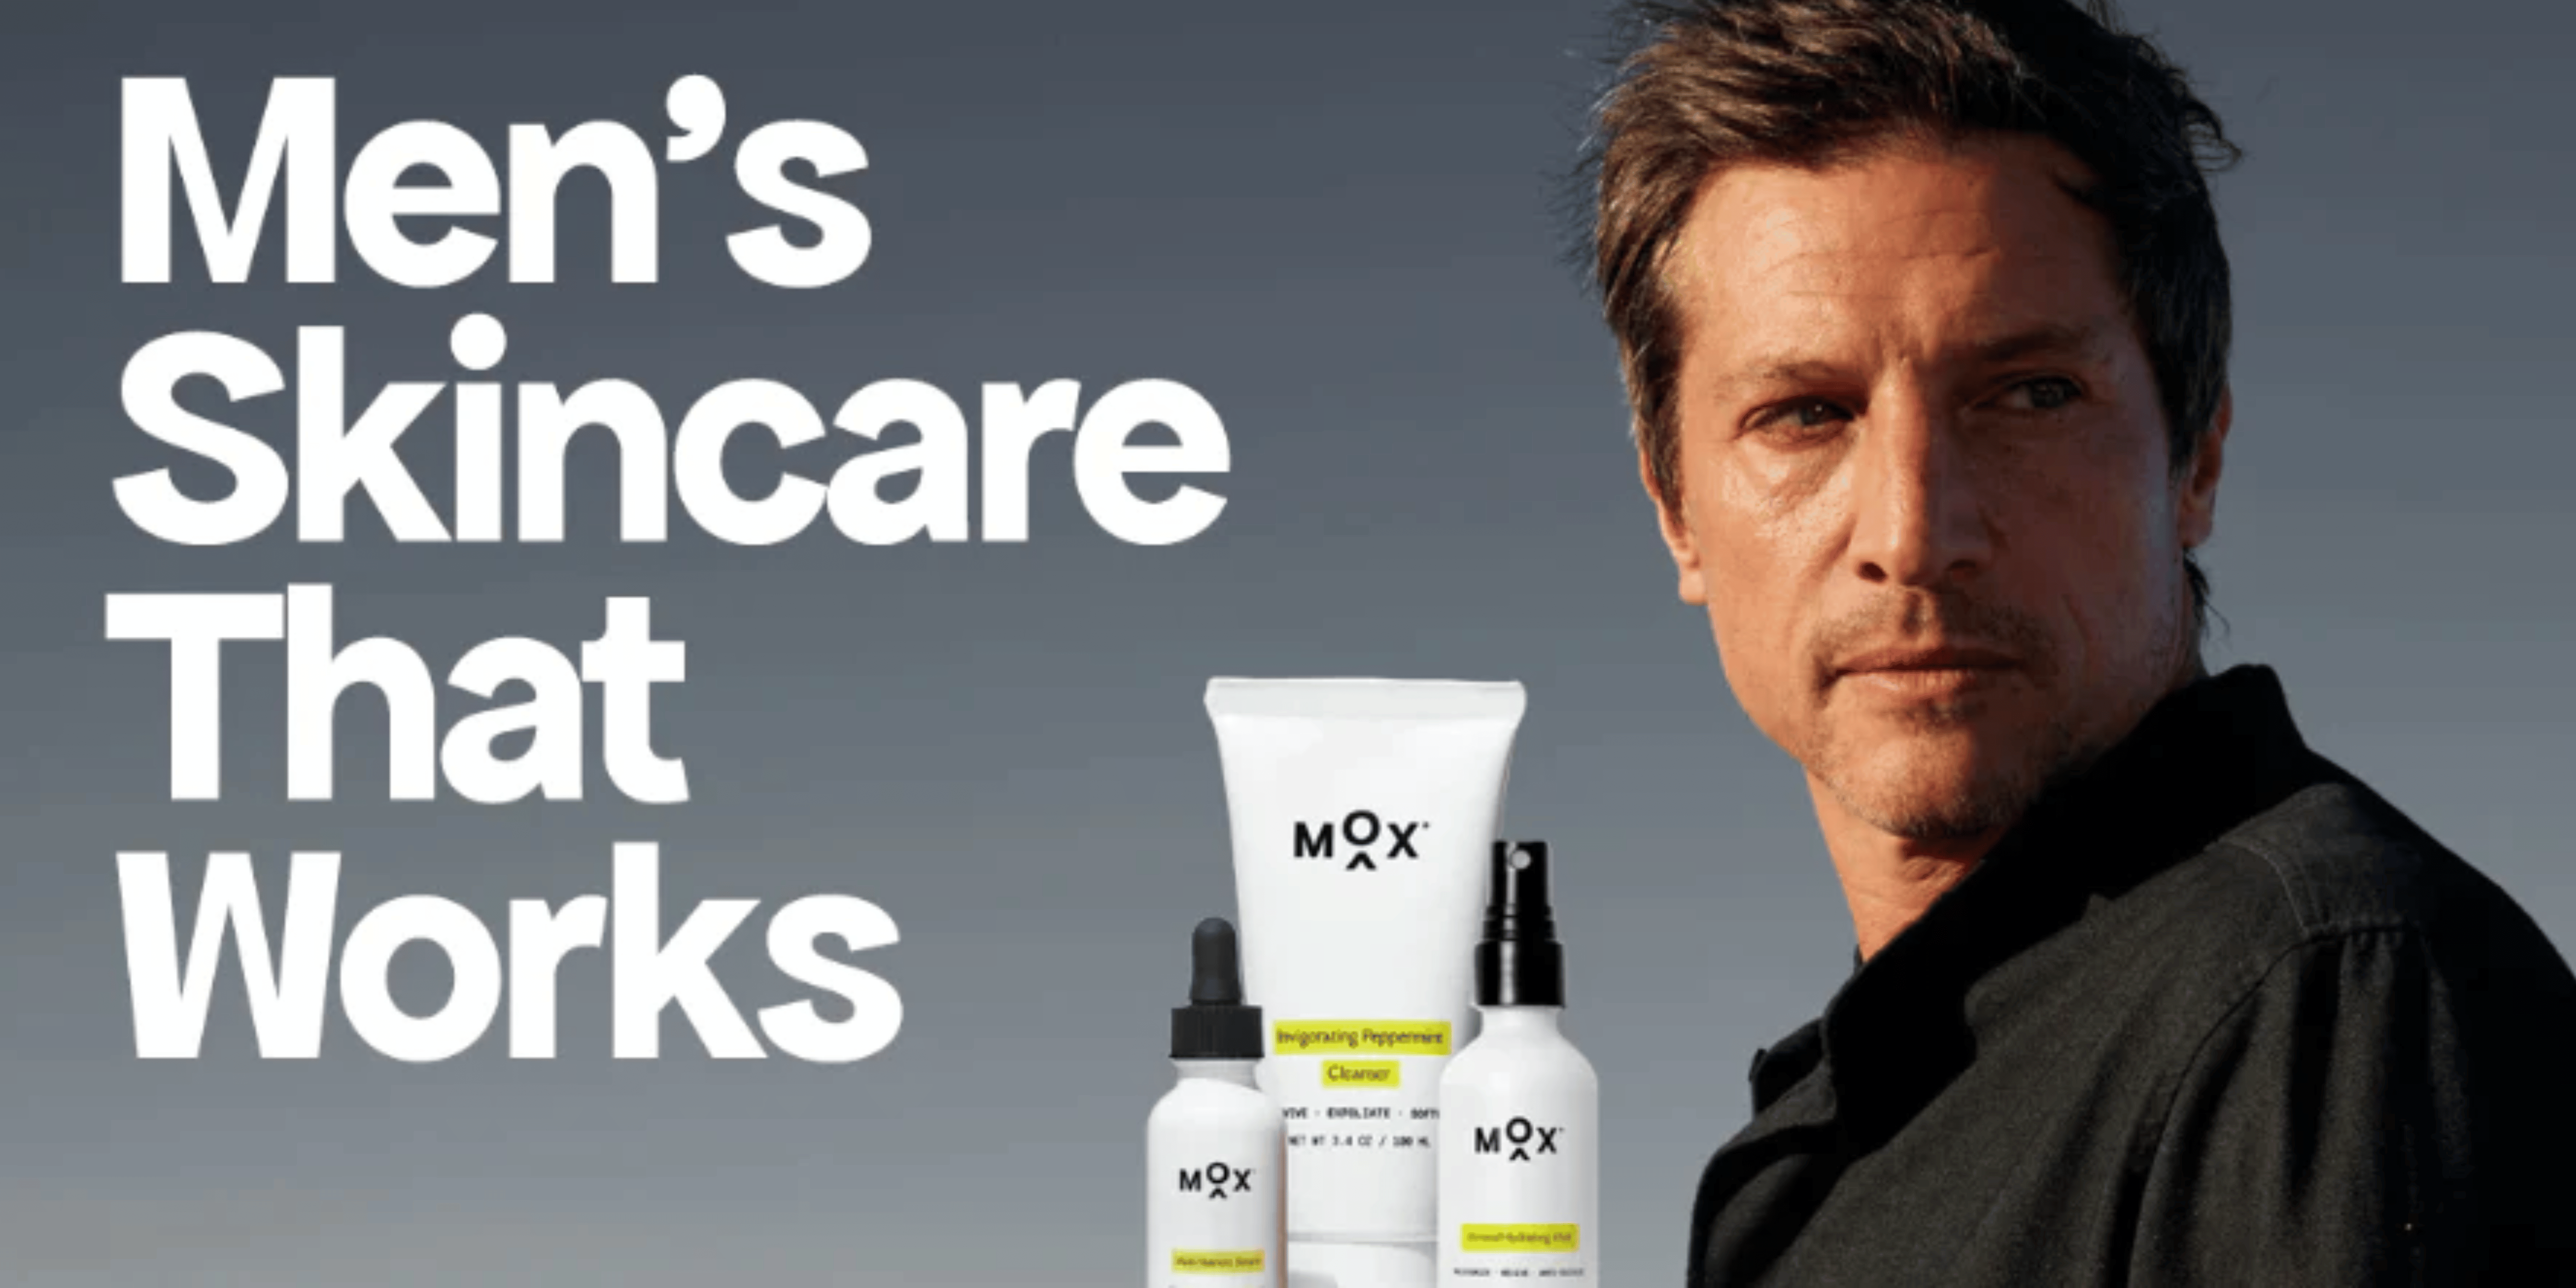 What age is acne the worst? MOX, a skincare brand co-founded by Simon Rex, has formulations for acne.